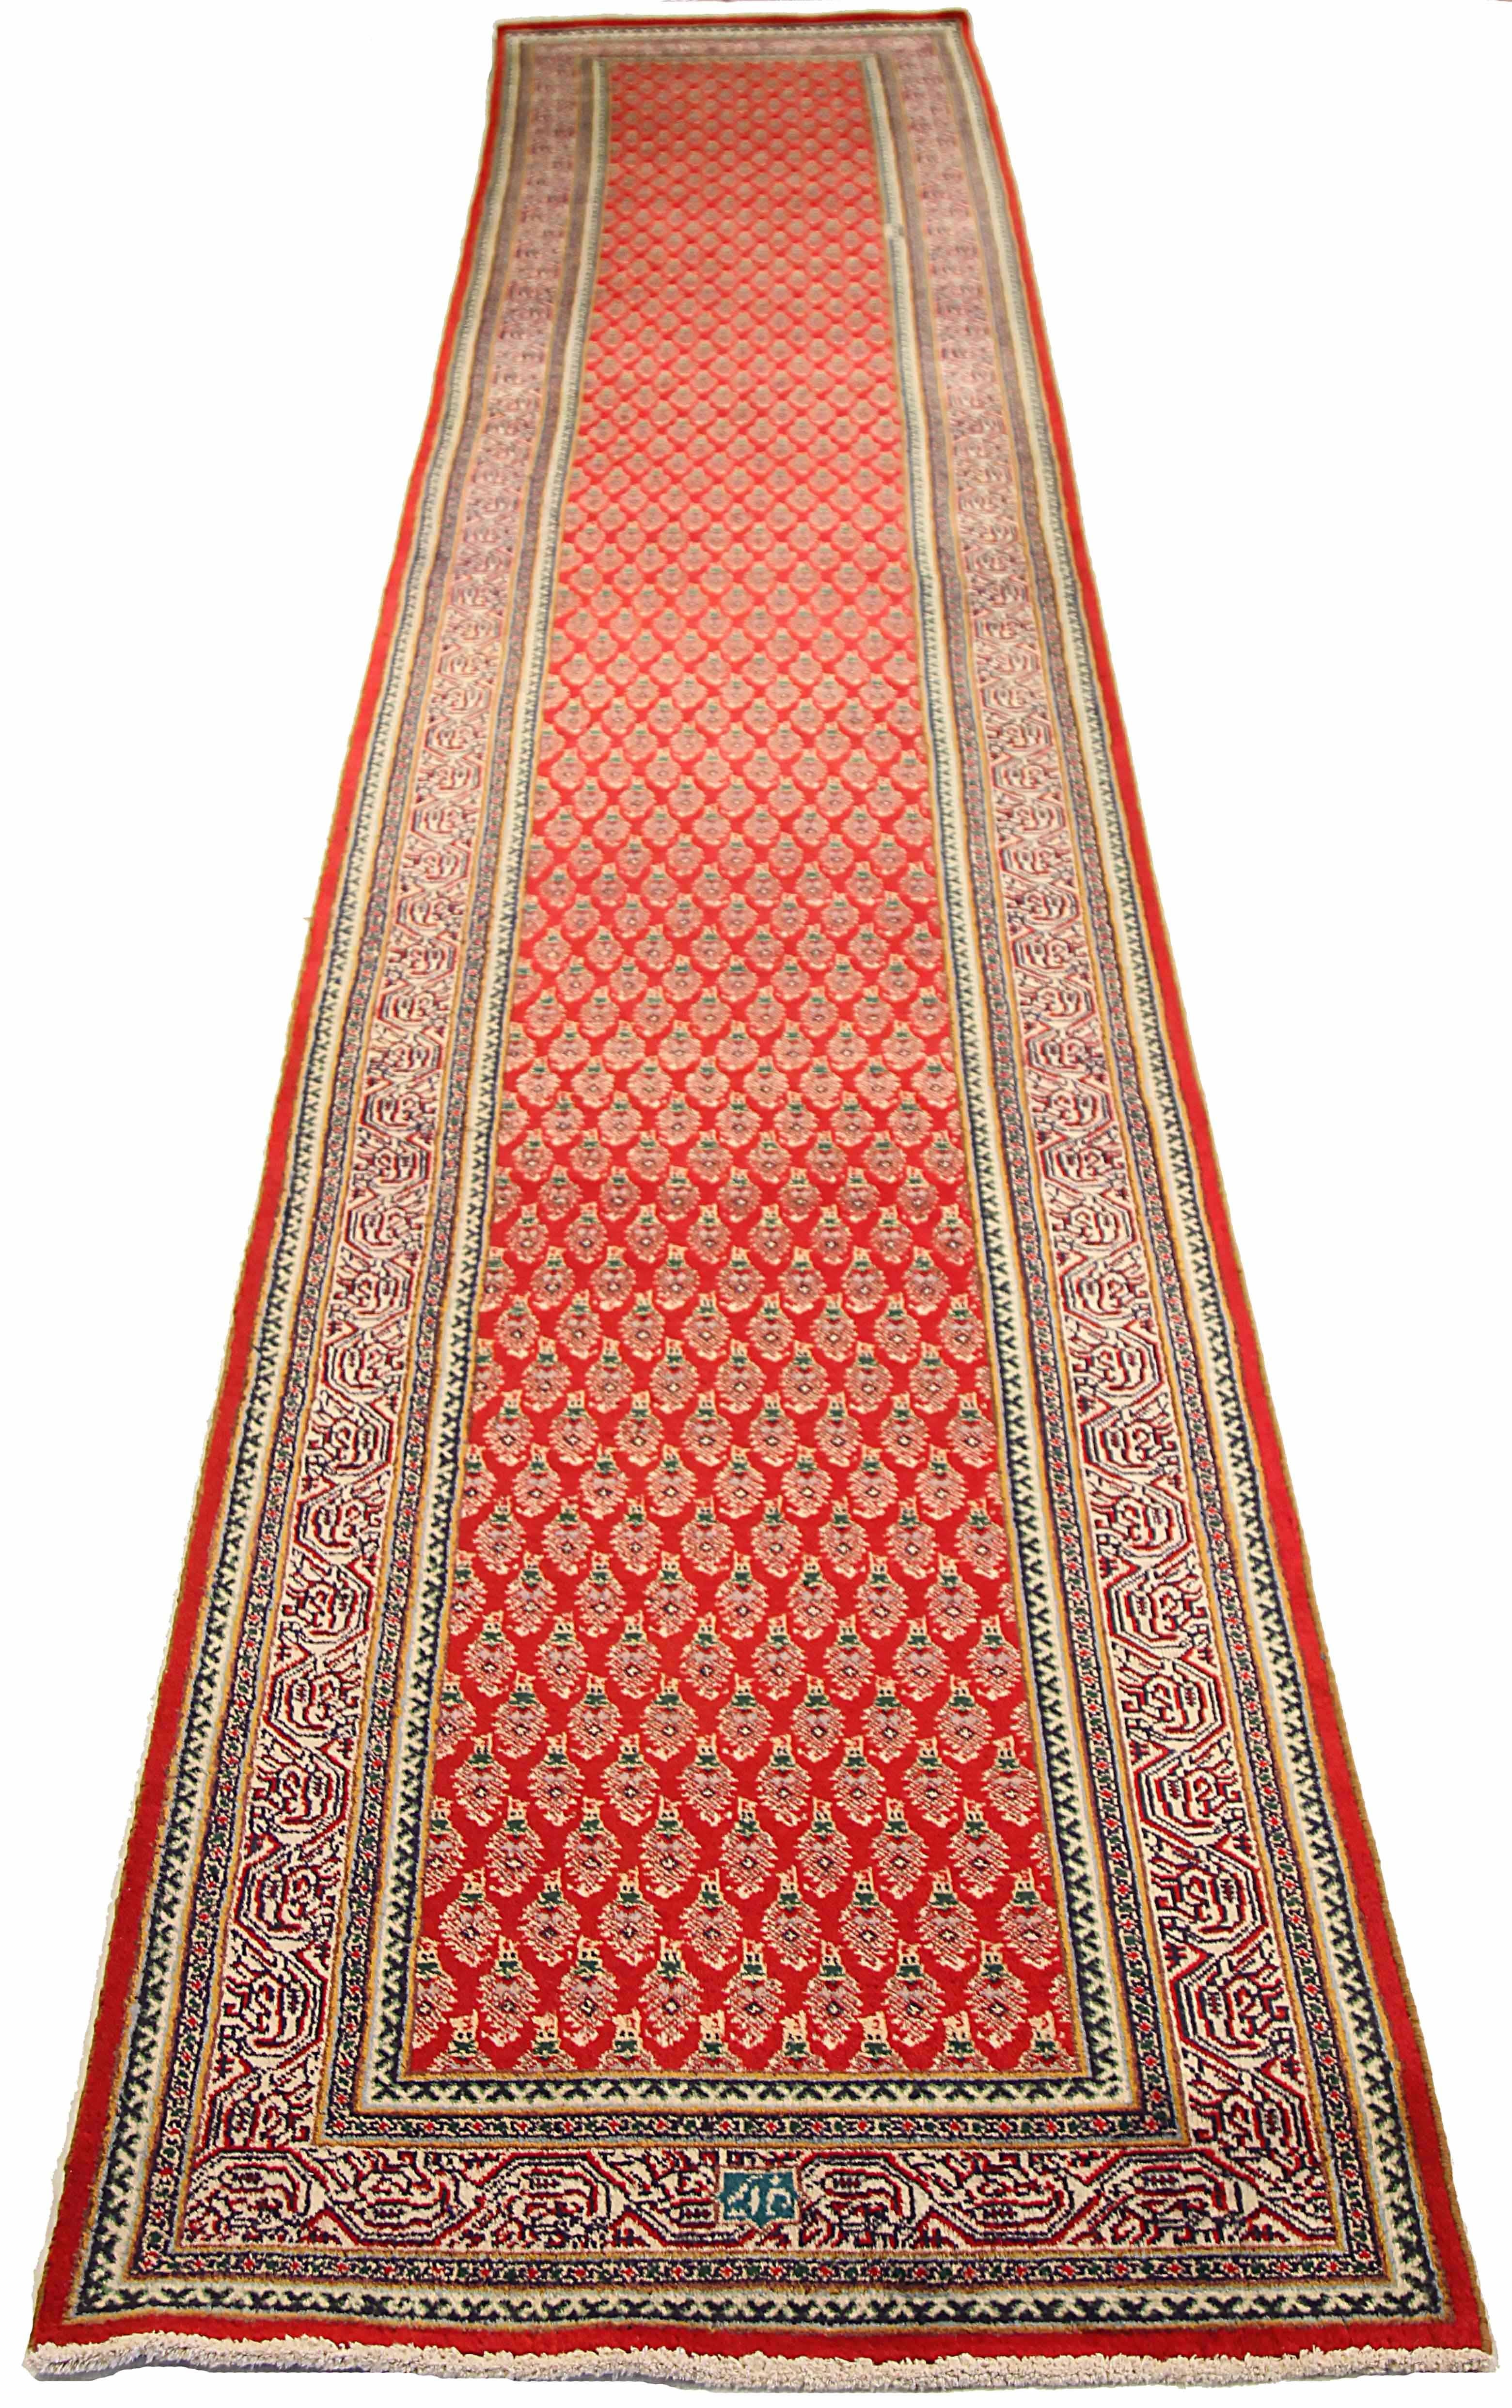 Antique Persian runner rug handwoven from the finest sheep’s wool. It’s colored with all-natural vegetable dyes that are safe for humans and pets. It’s a traditional Tabriz design handwoven by expert artisans. It’s a lovely runner rug that can be